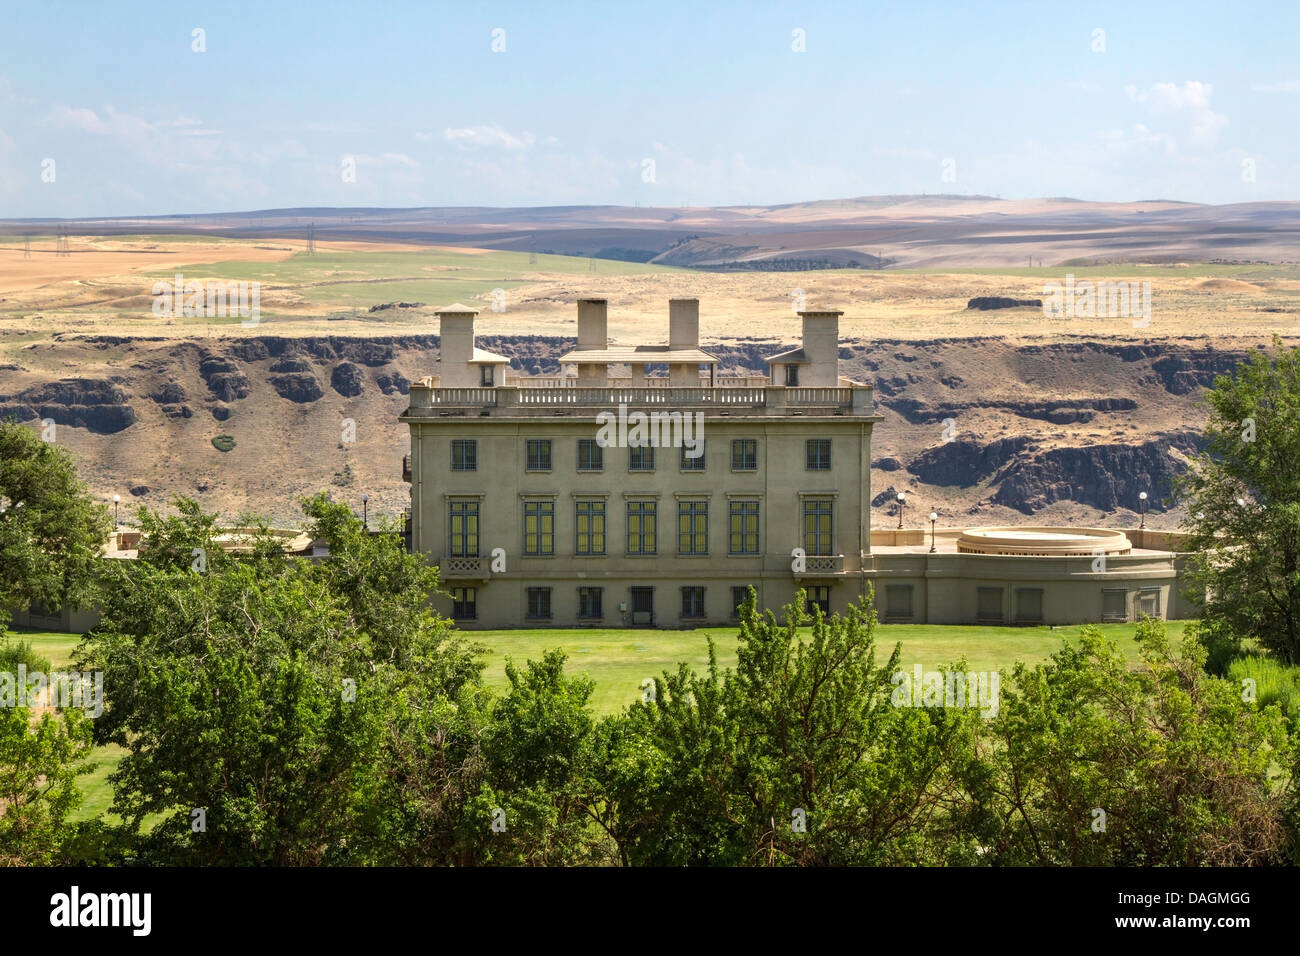 Historic Maryhill Museum of Art in the Columbia River Gorge.  Washington State in the foreground, Oregon in the background. Stock Photo